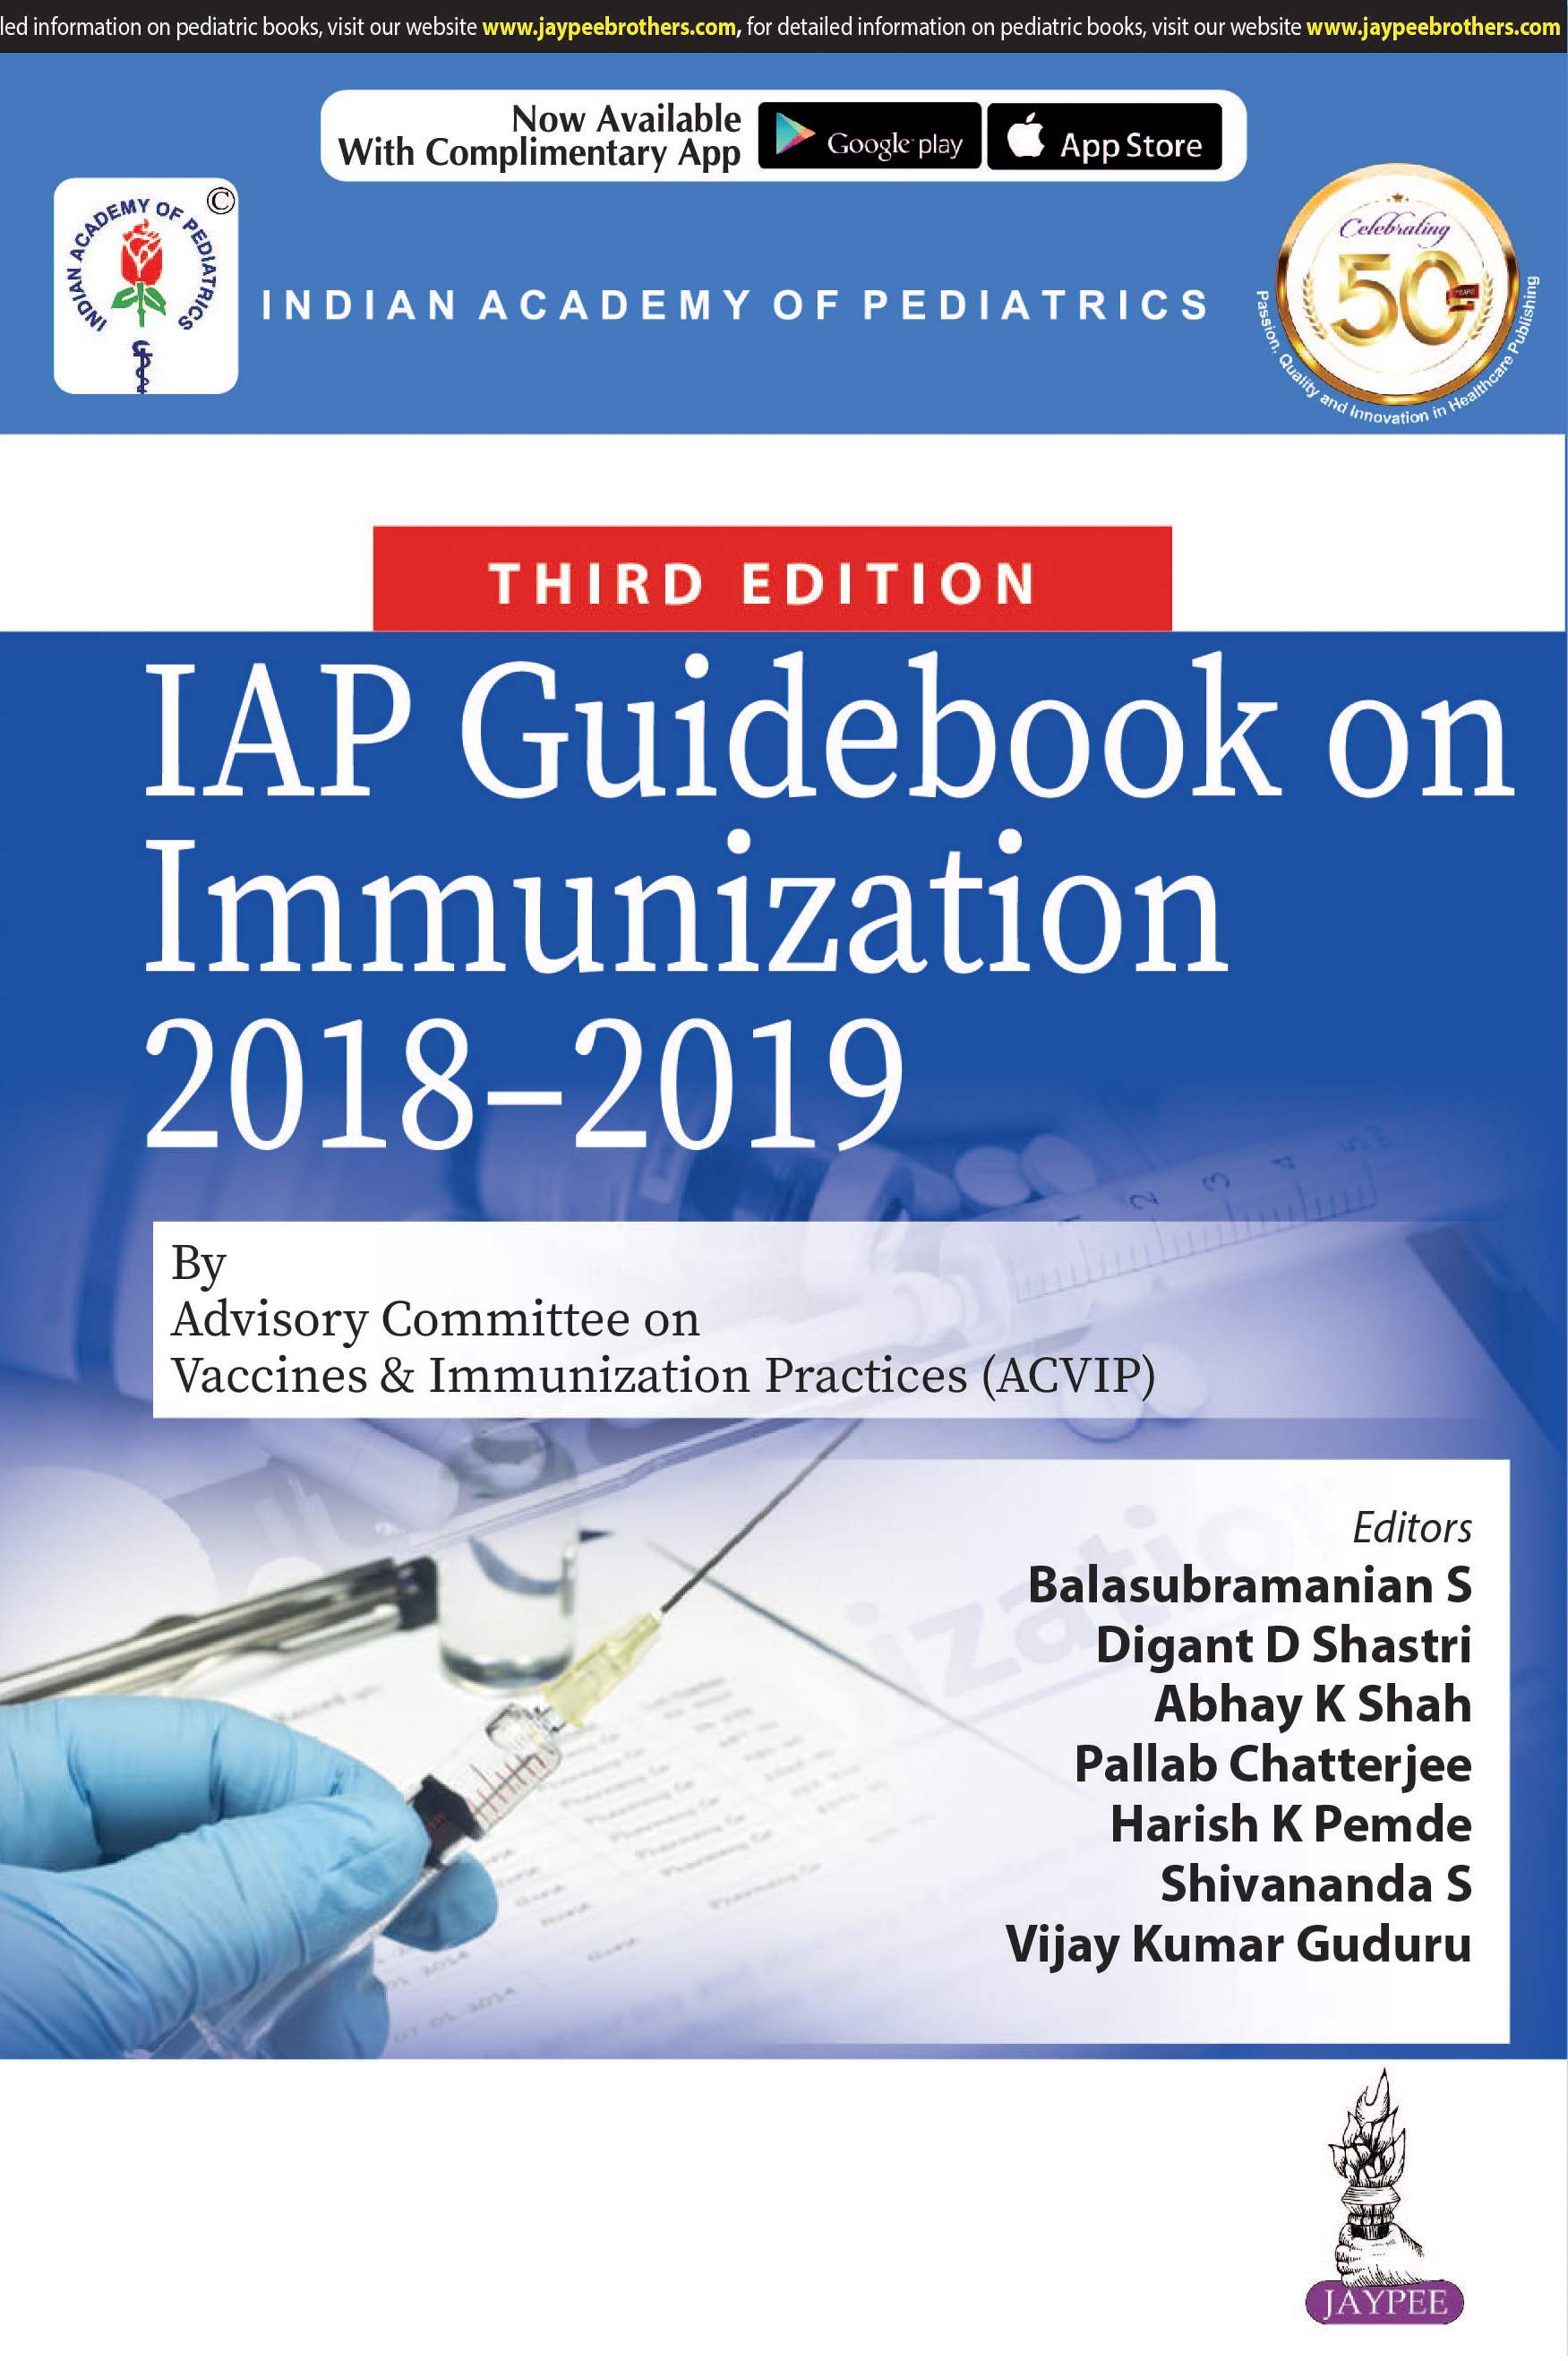 Iap Guidebook On Immunization 2018-2019 By Advisory Committee On Vaccines & Immunization Practices (Acvip)